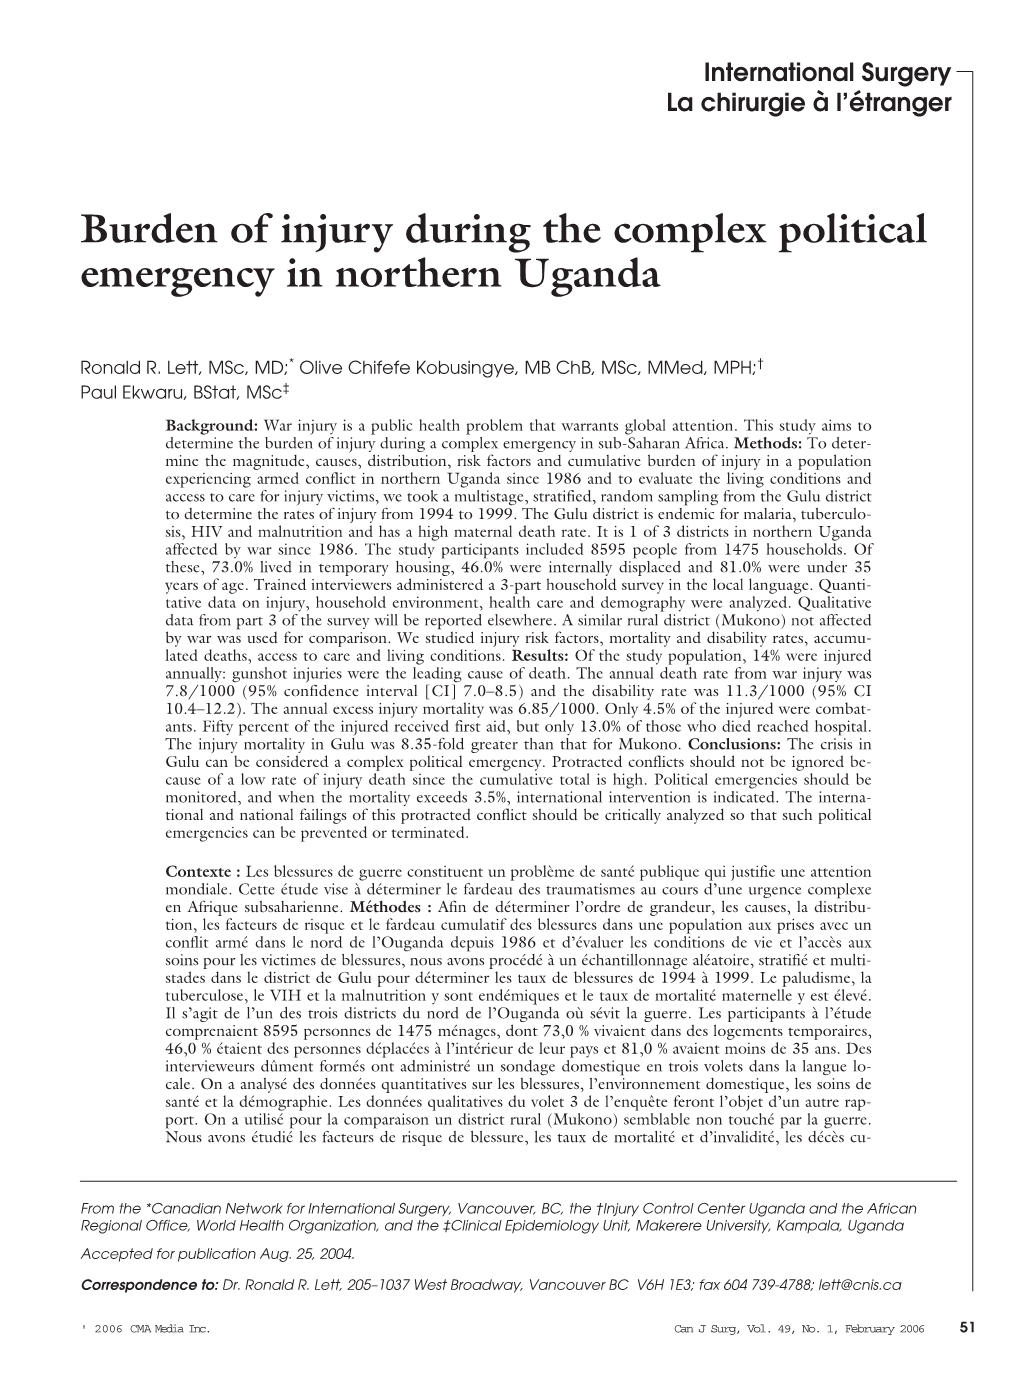 Burden of Injury During the Complex Political Emergency in Northern Uganda